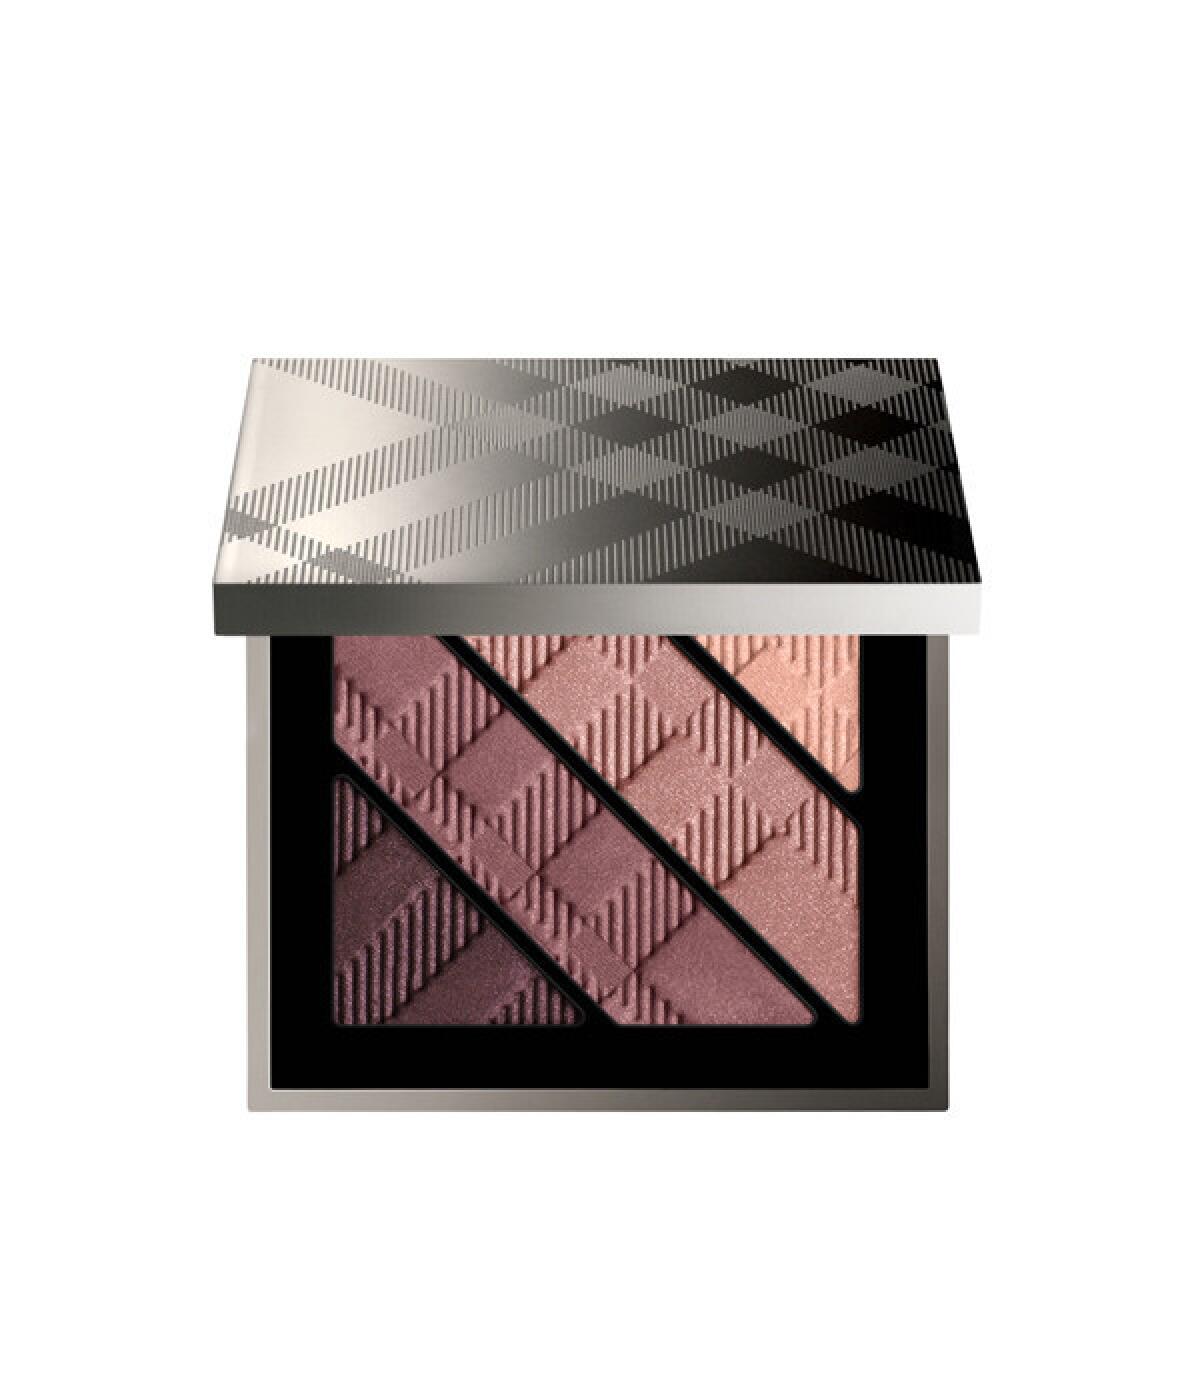 Burberry Complete Eye Palette in Nude Blush No. 12, $59 at select Burberry boutiques and burberry.com; courtesy of Burberry